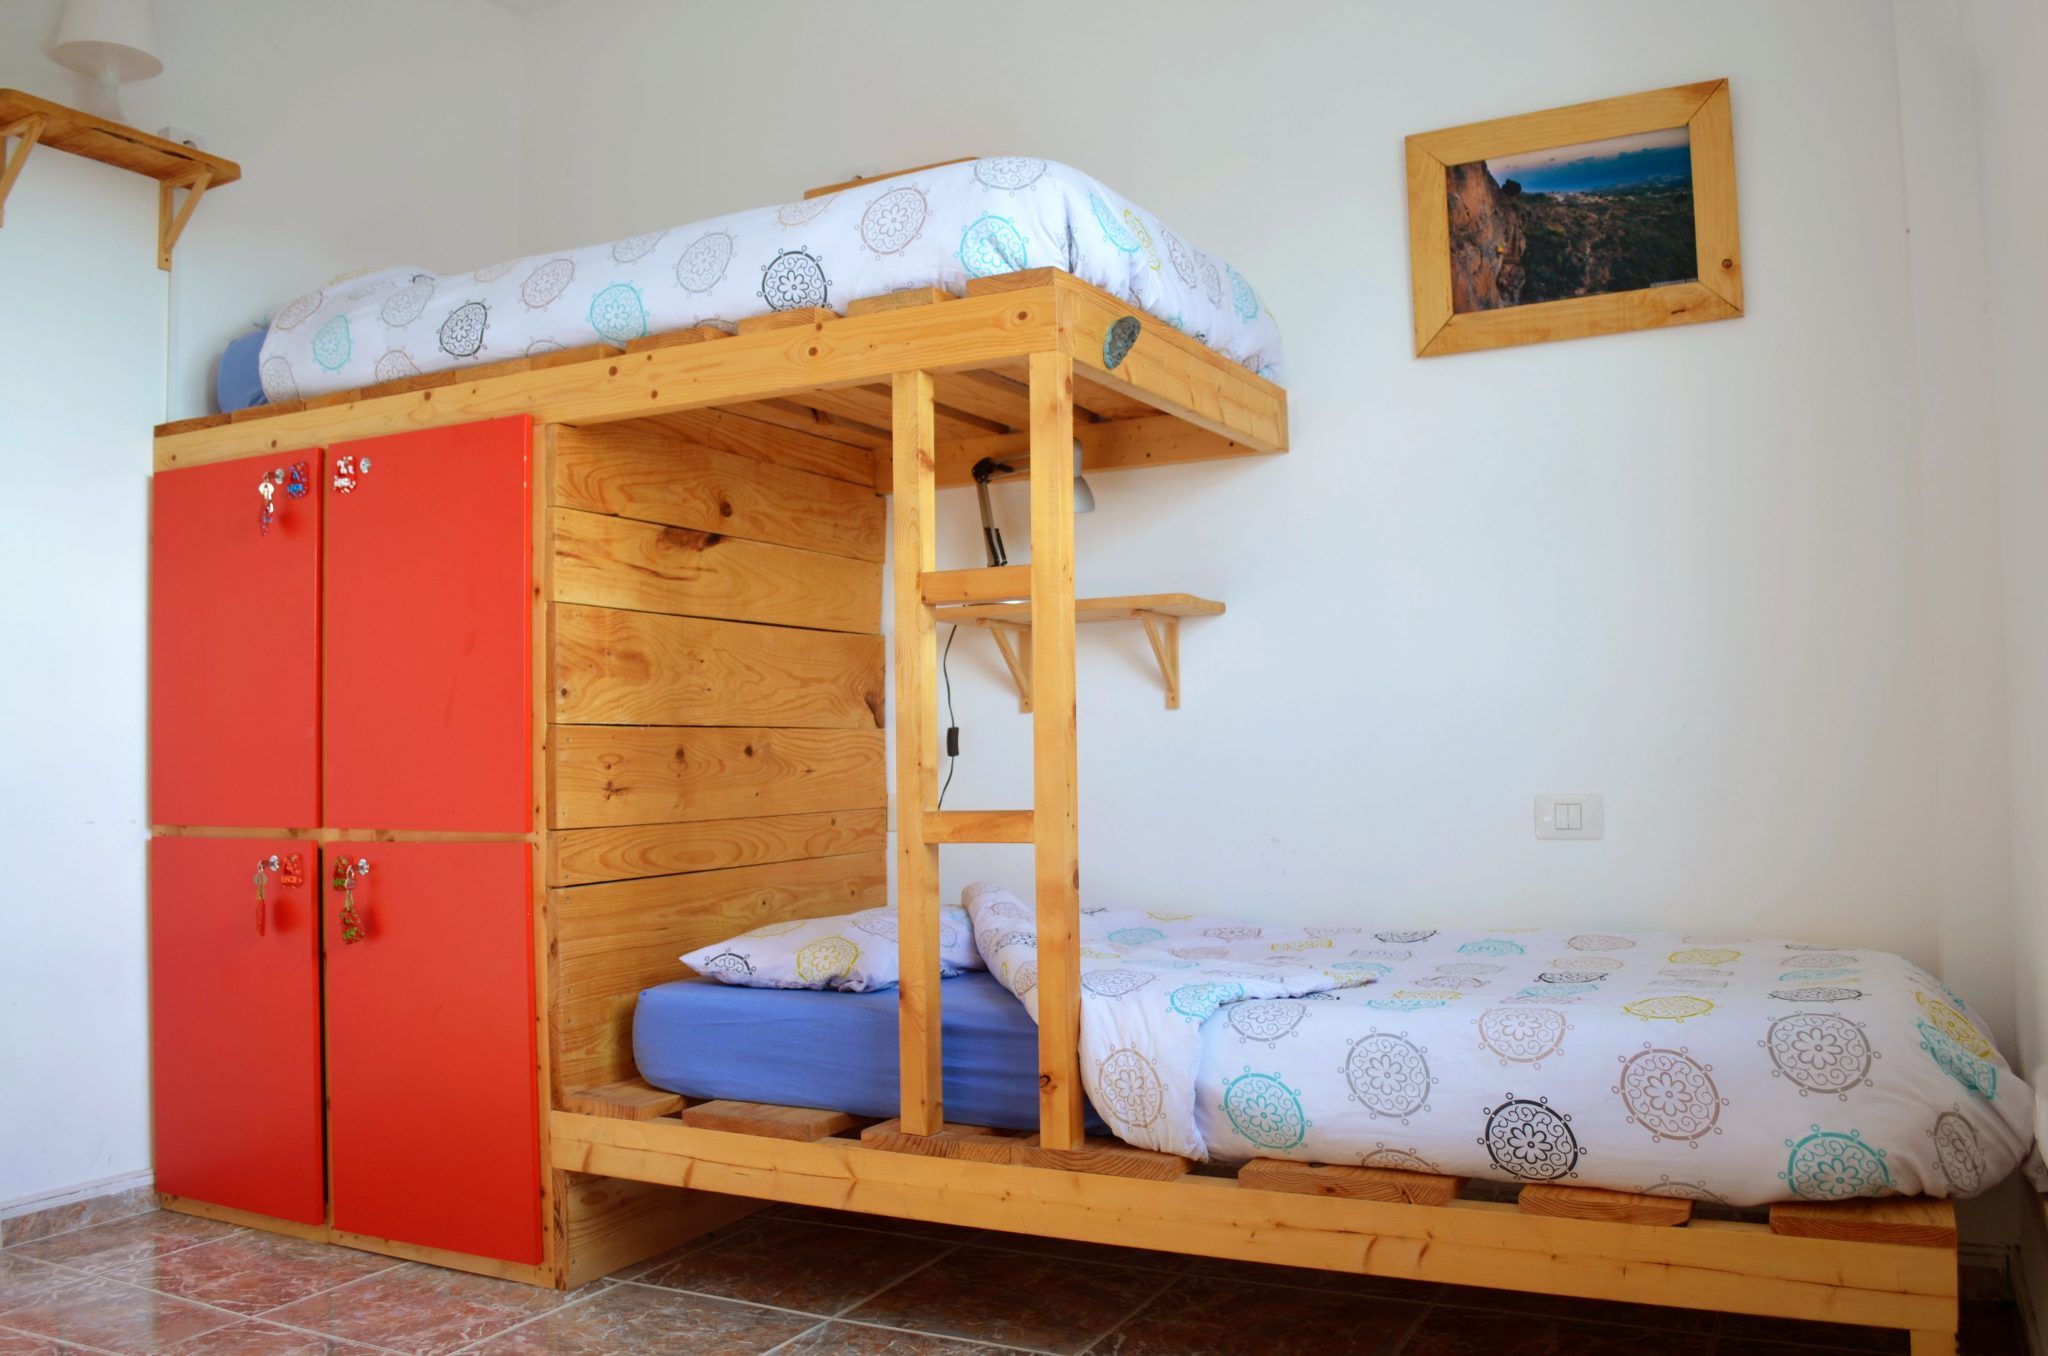 Bunks in one of the rooms at Tenerife Climbing House